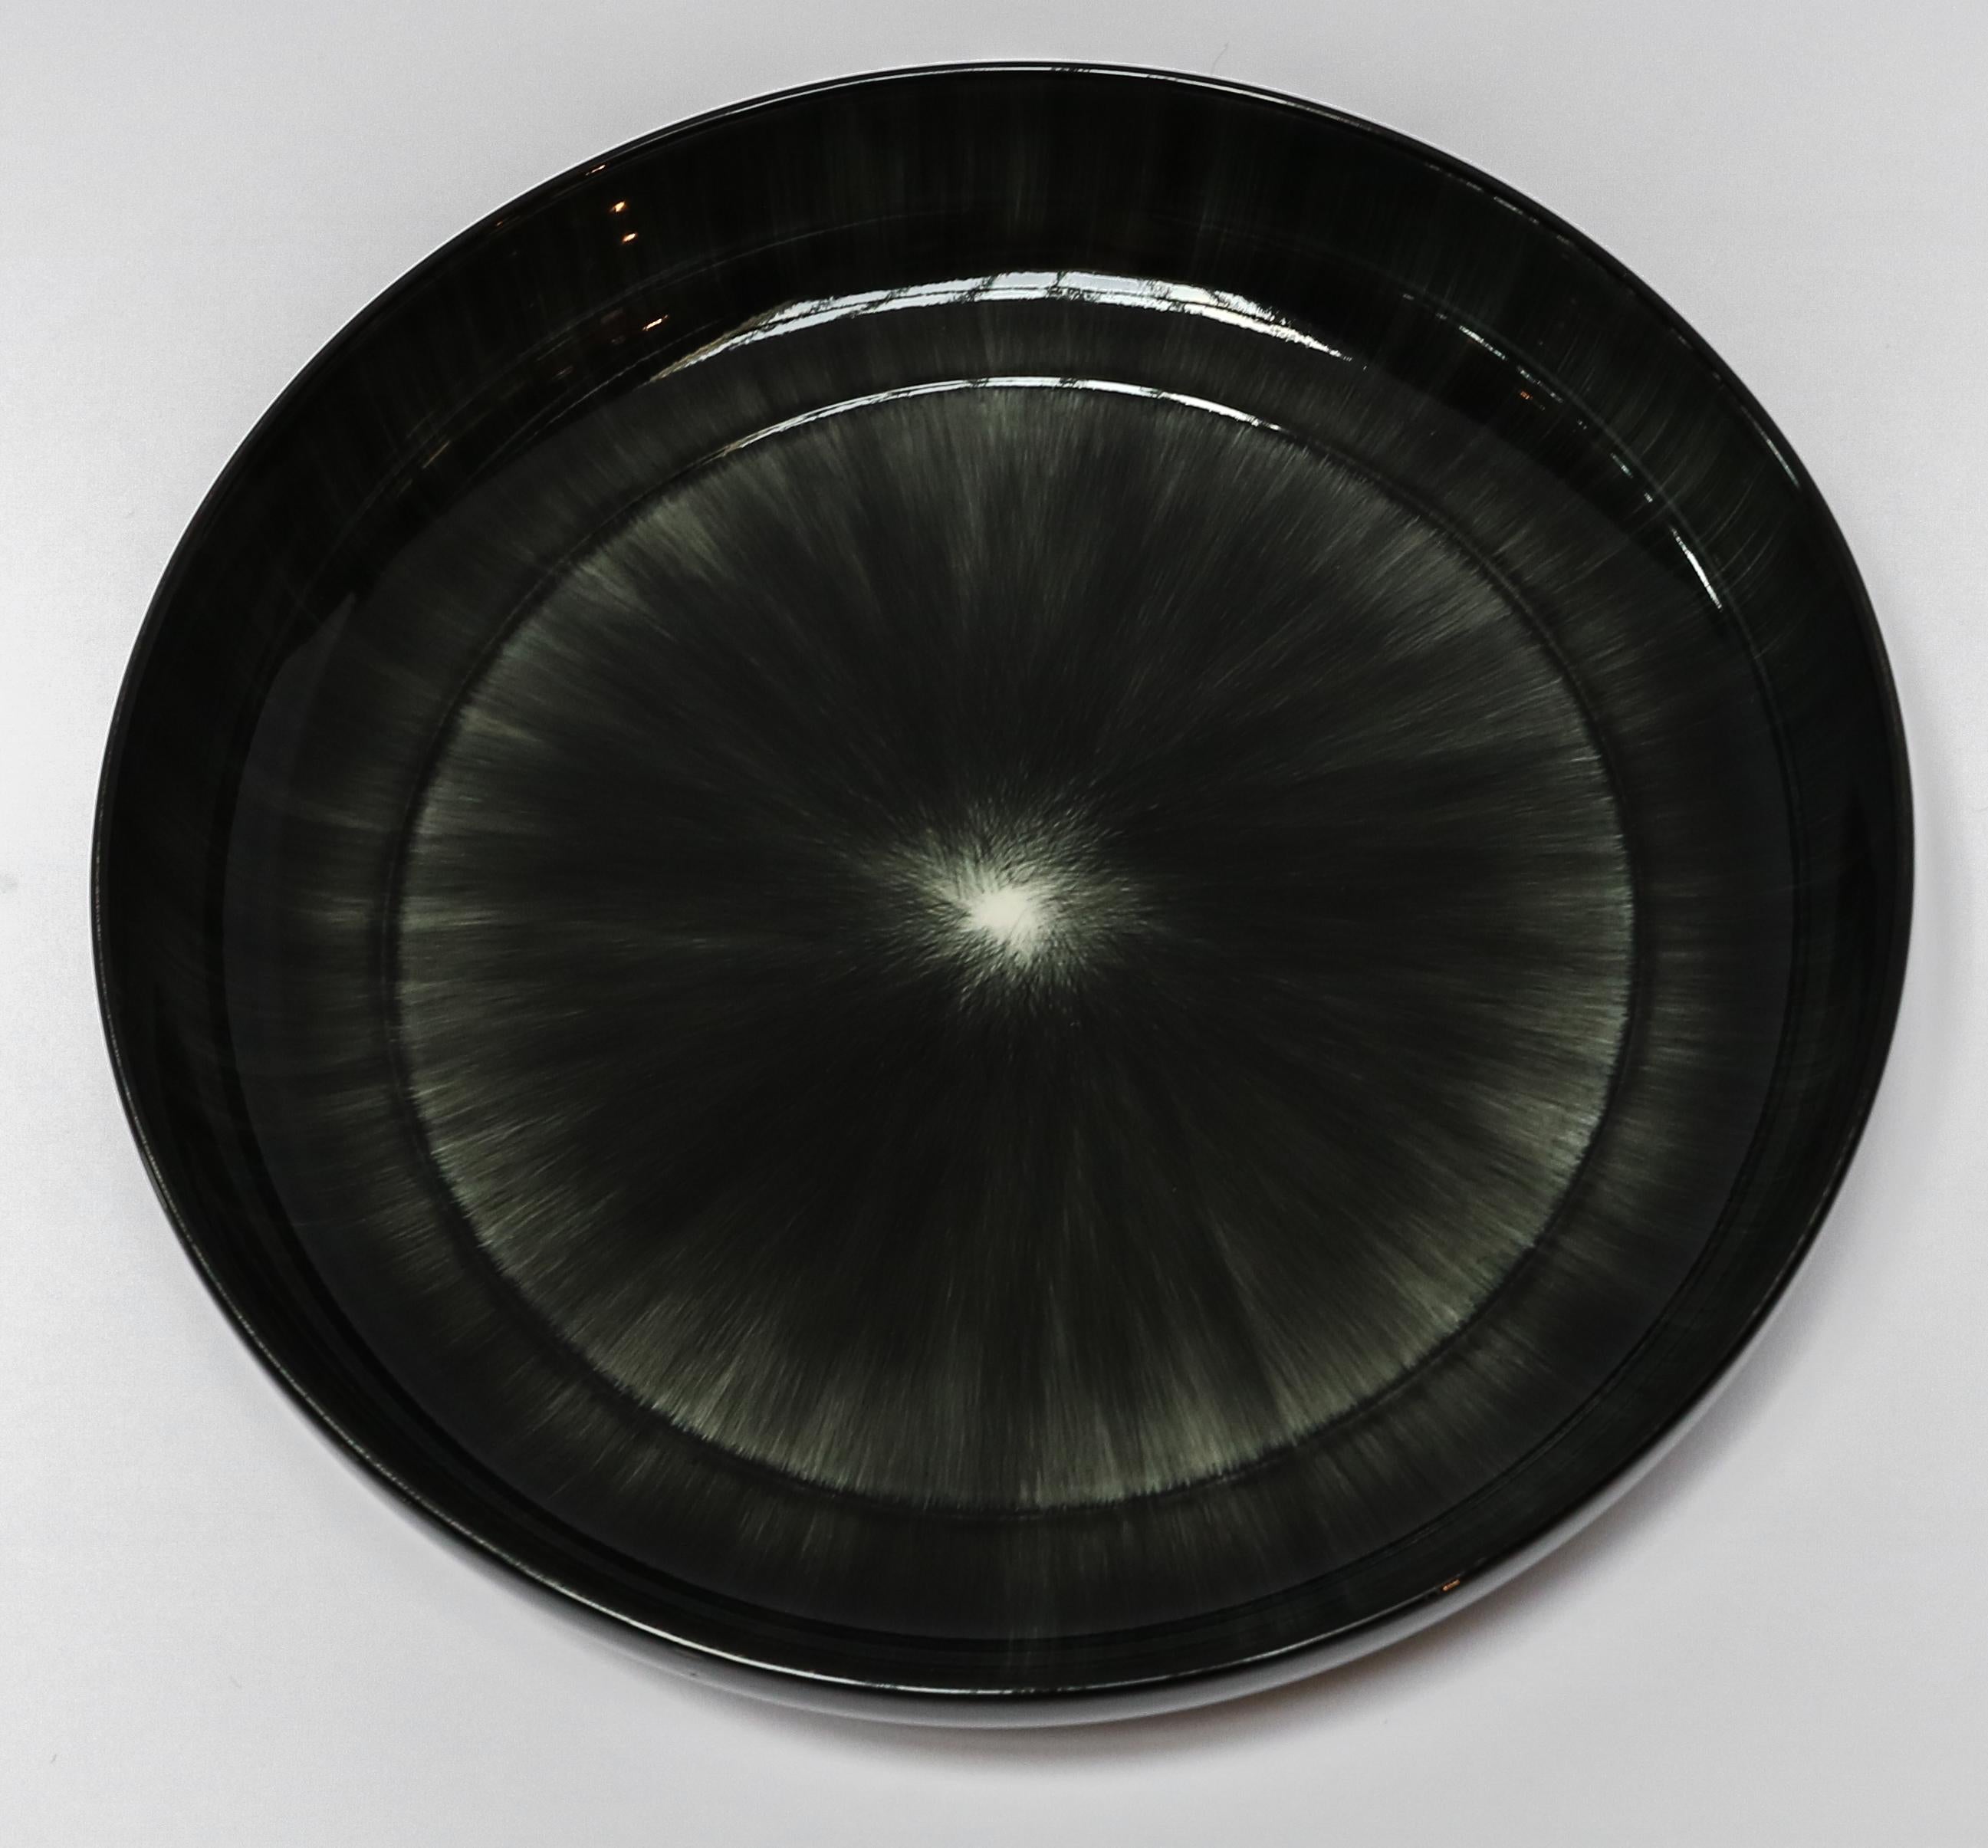 Ann Demeulemeester for Serax Dé large high plate / bowl in black / off white. Hand painted with a starburst pattern. Measures: 24 cm diameter x 4.2 cm high. Must be purchased in quantities of two.